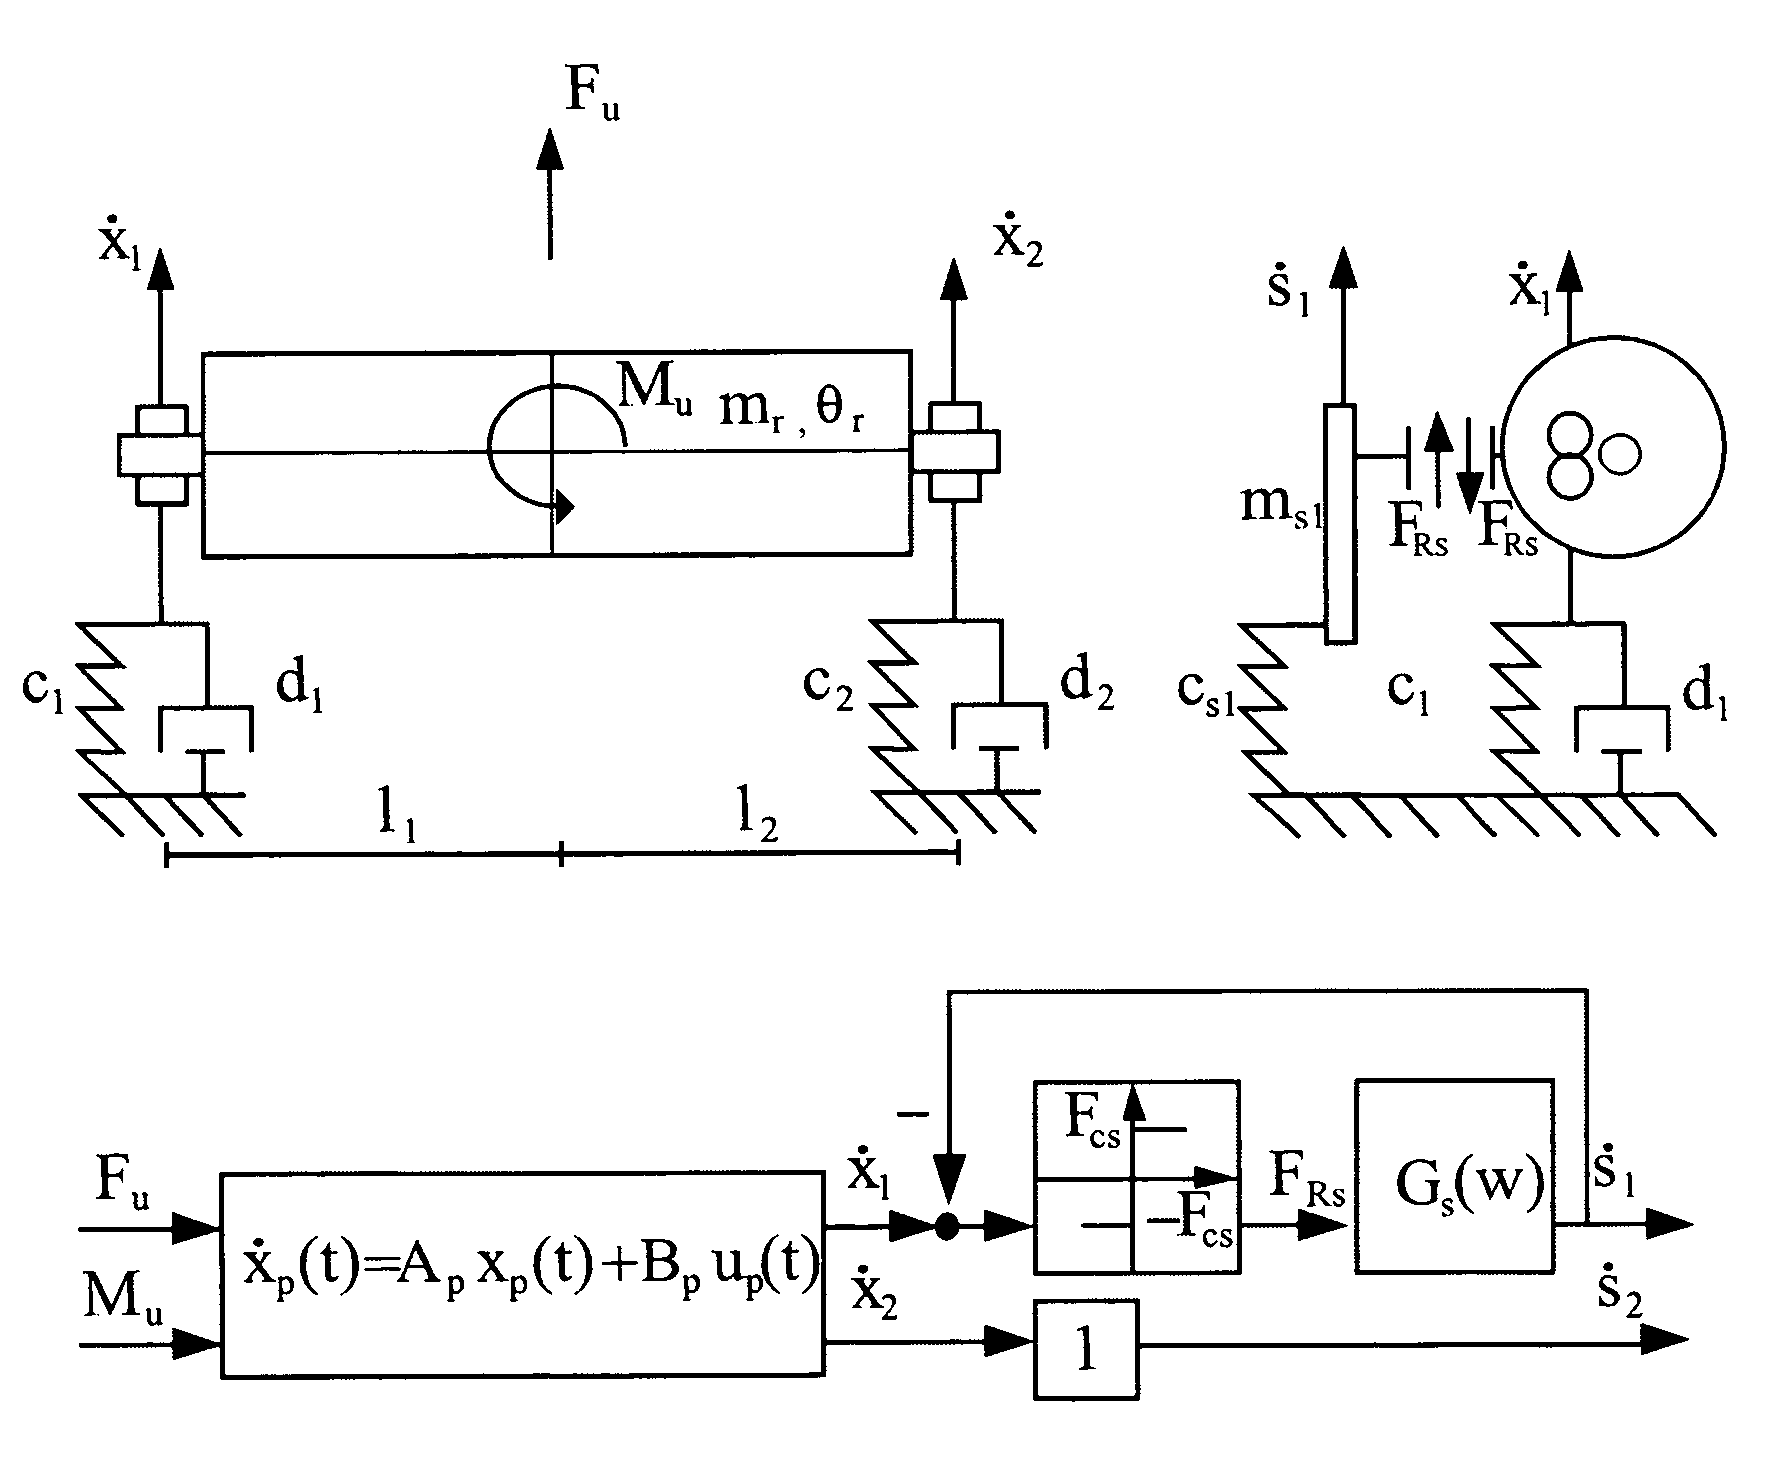 Method for fault detection and diagnosis of a rotary machine